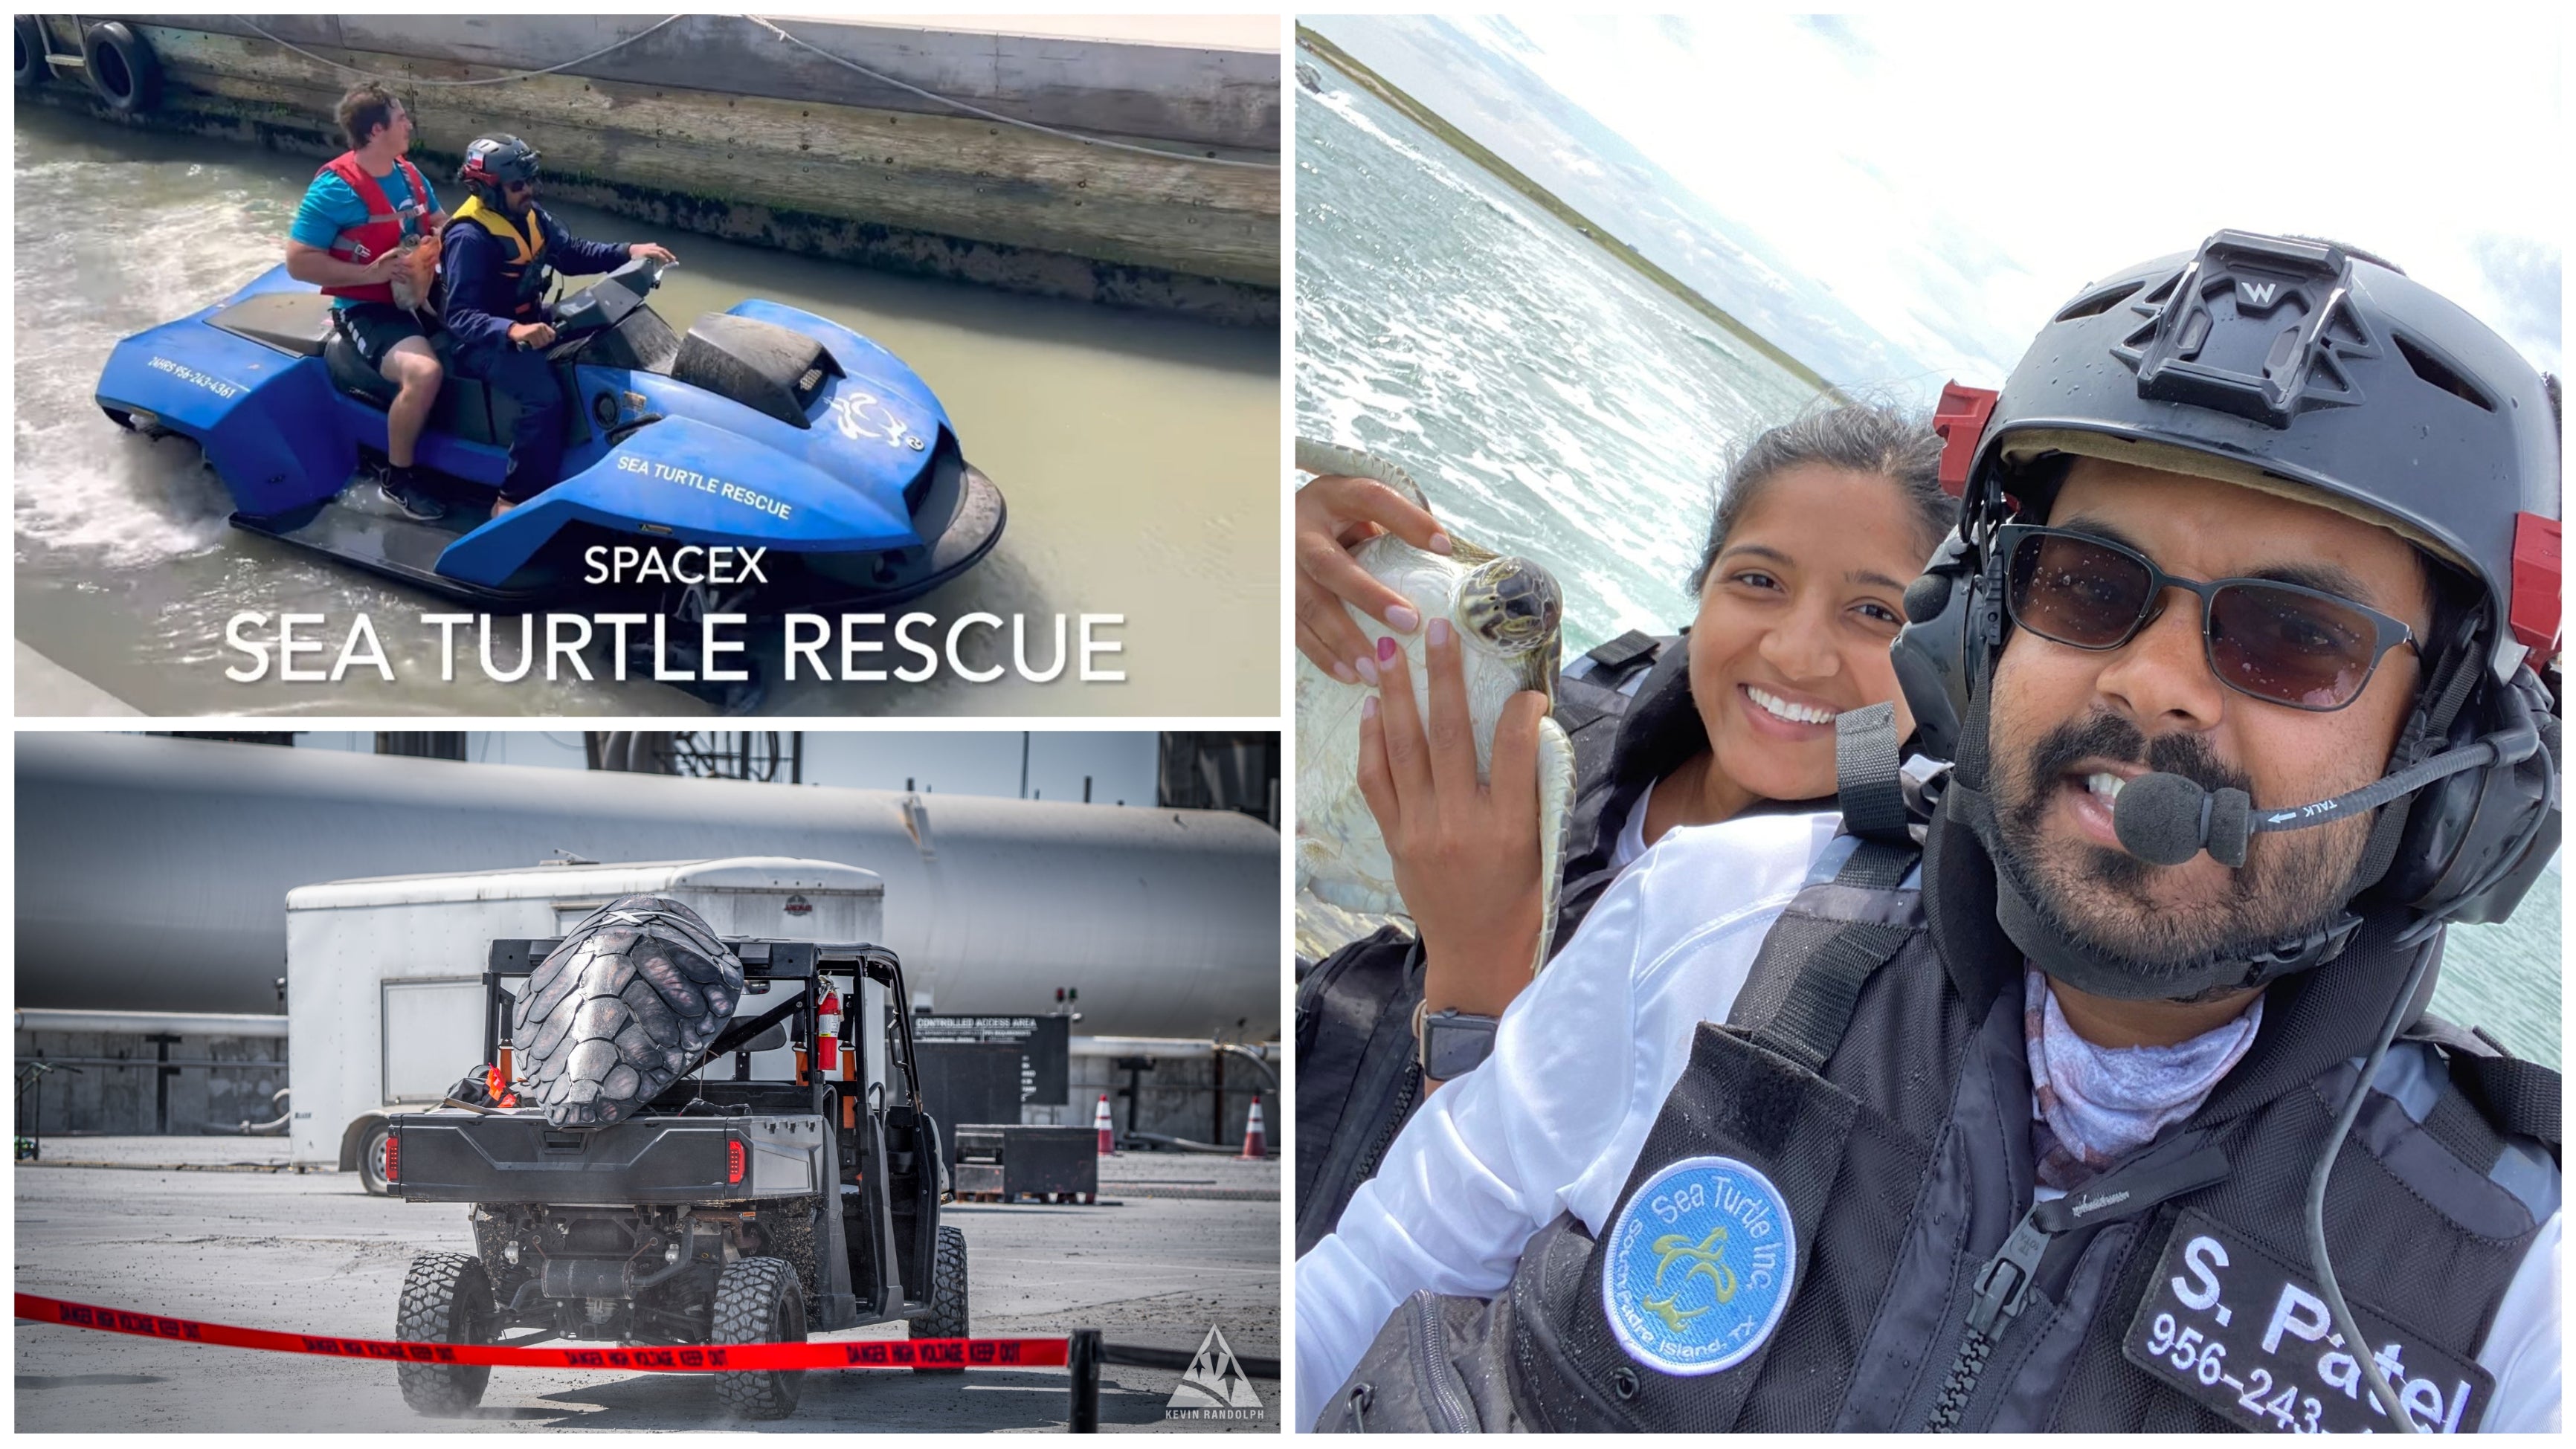 SpaceX has a Starbase Sea Turtle Patrol rescue team at Boca Chica Beach